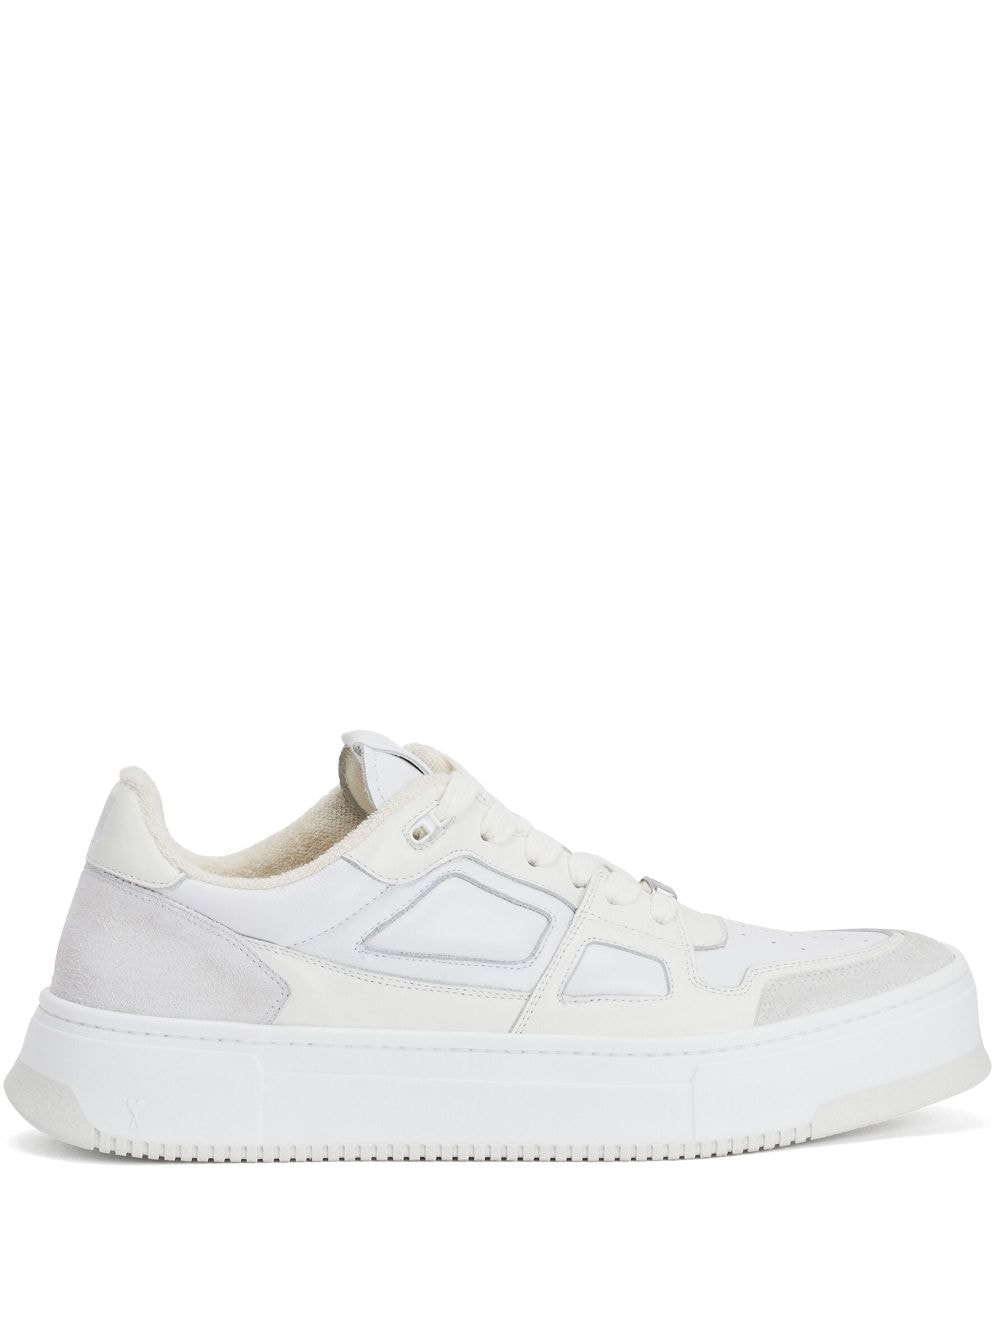 Ami Alexandre Mattiussi Lace-up Low-top Trainers In White